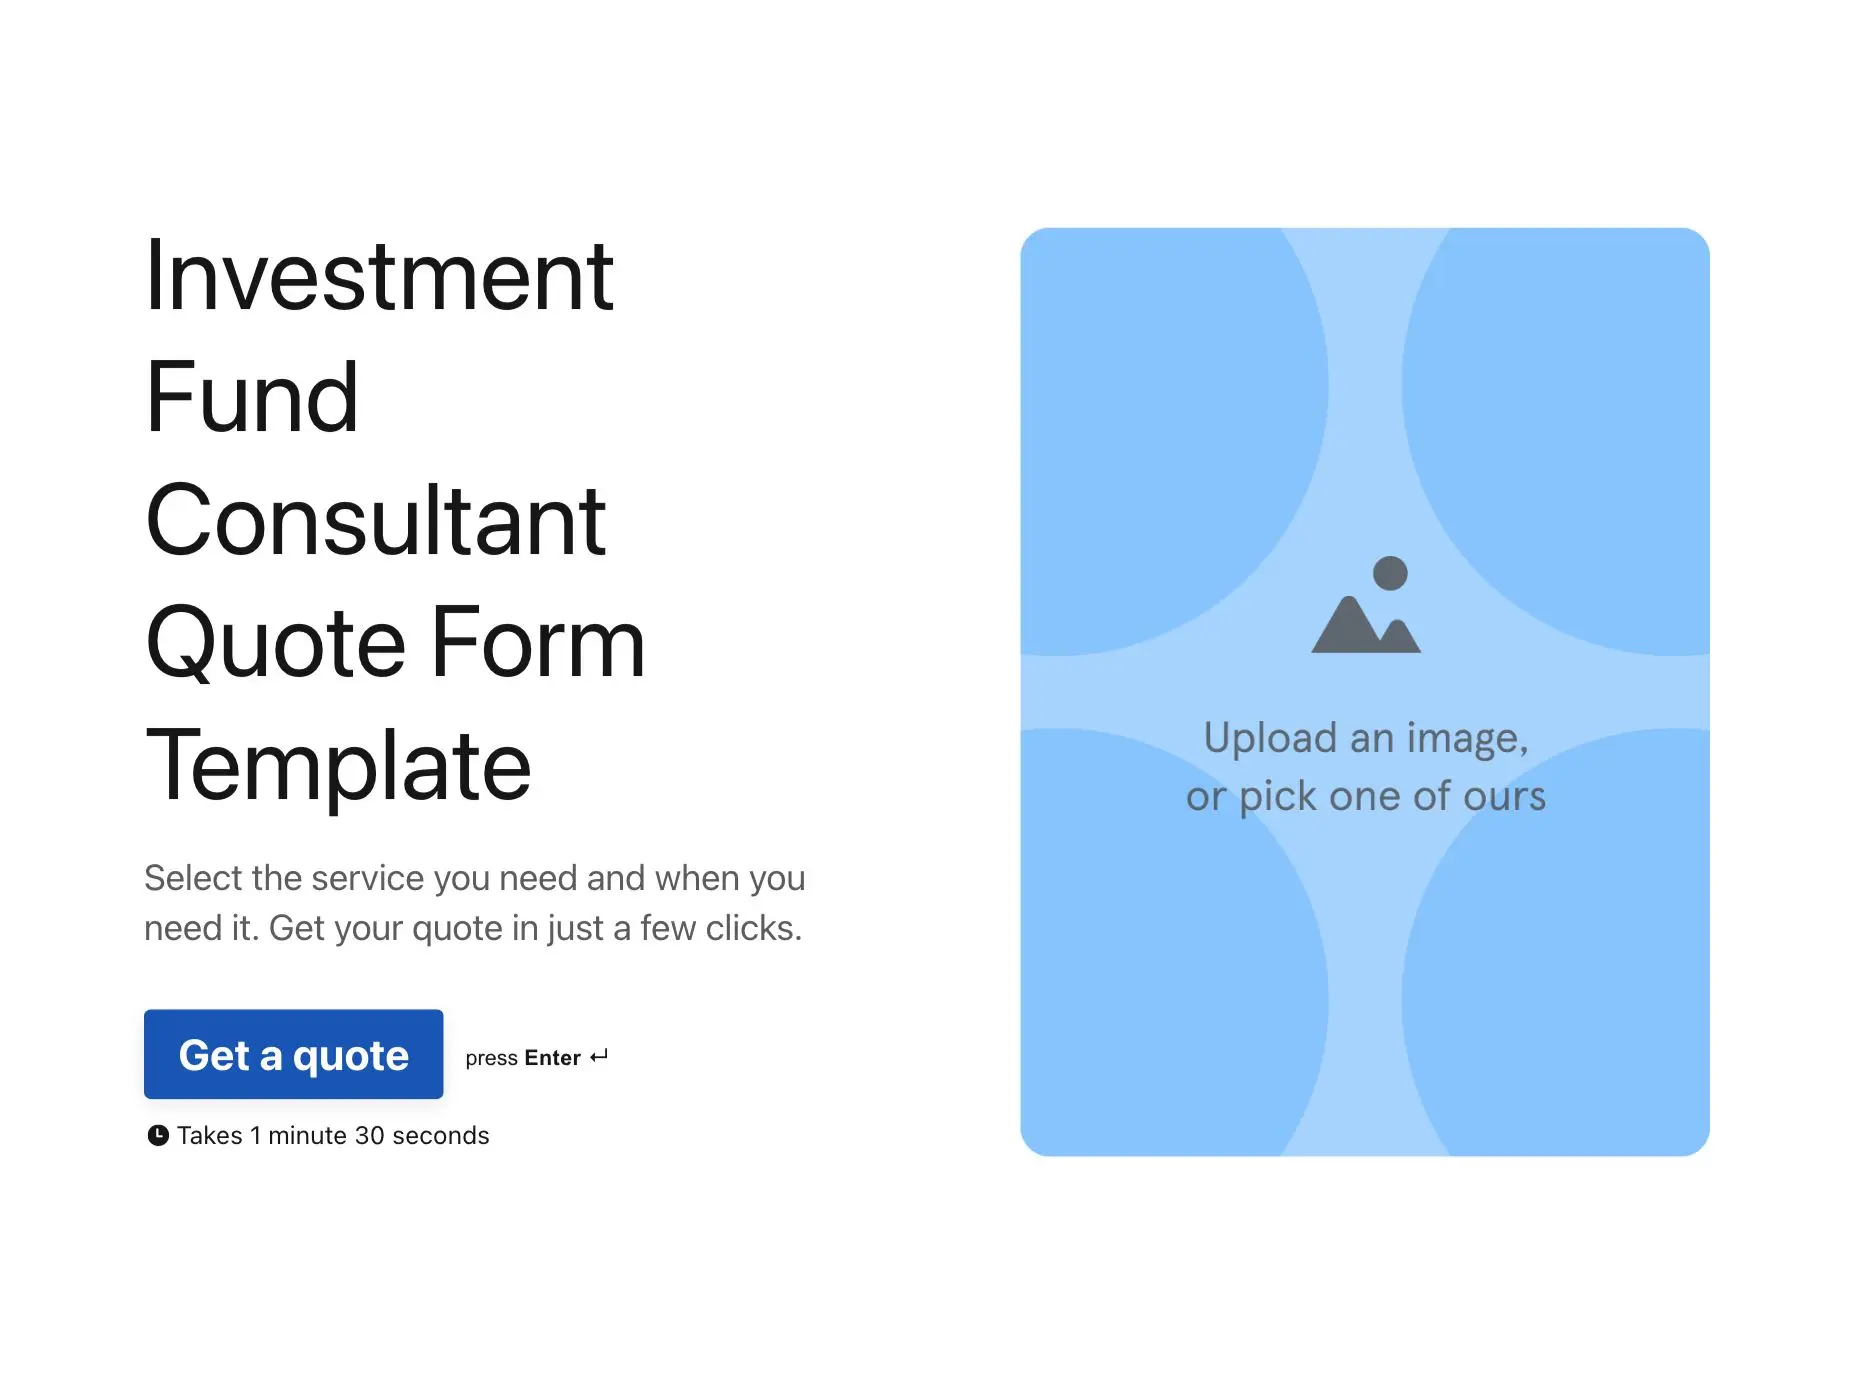 Investment Fund Consultant Quote Form Template Hero